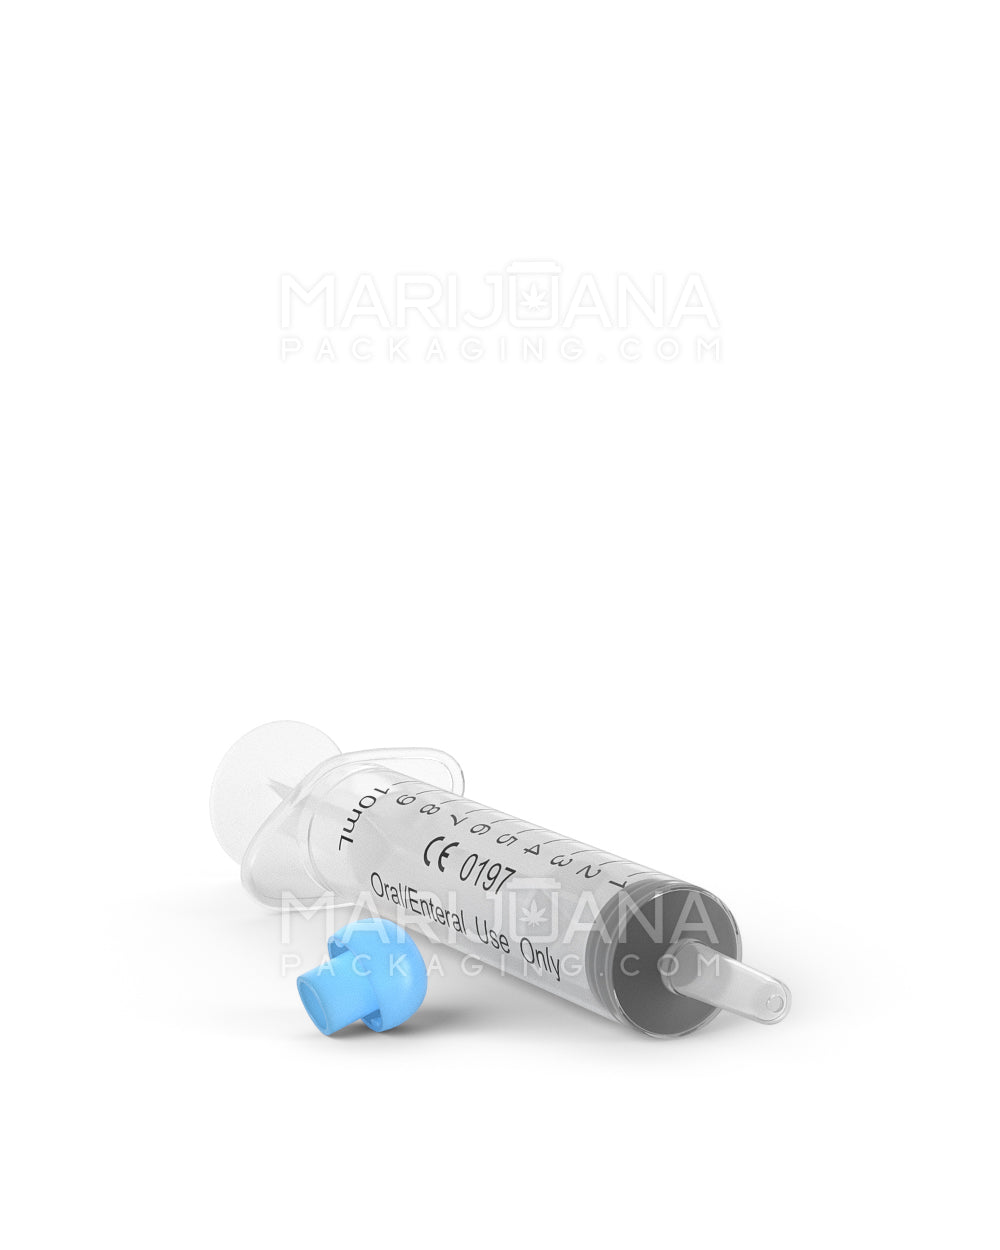 Plastic Oral Concentrate Syringes | 10mL - 1mL Increments - 100 Count - 4